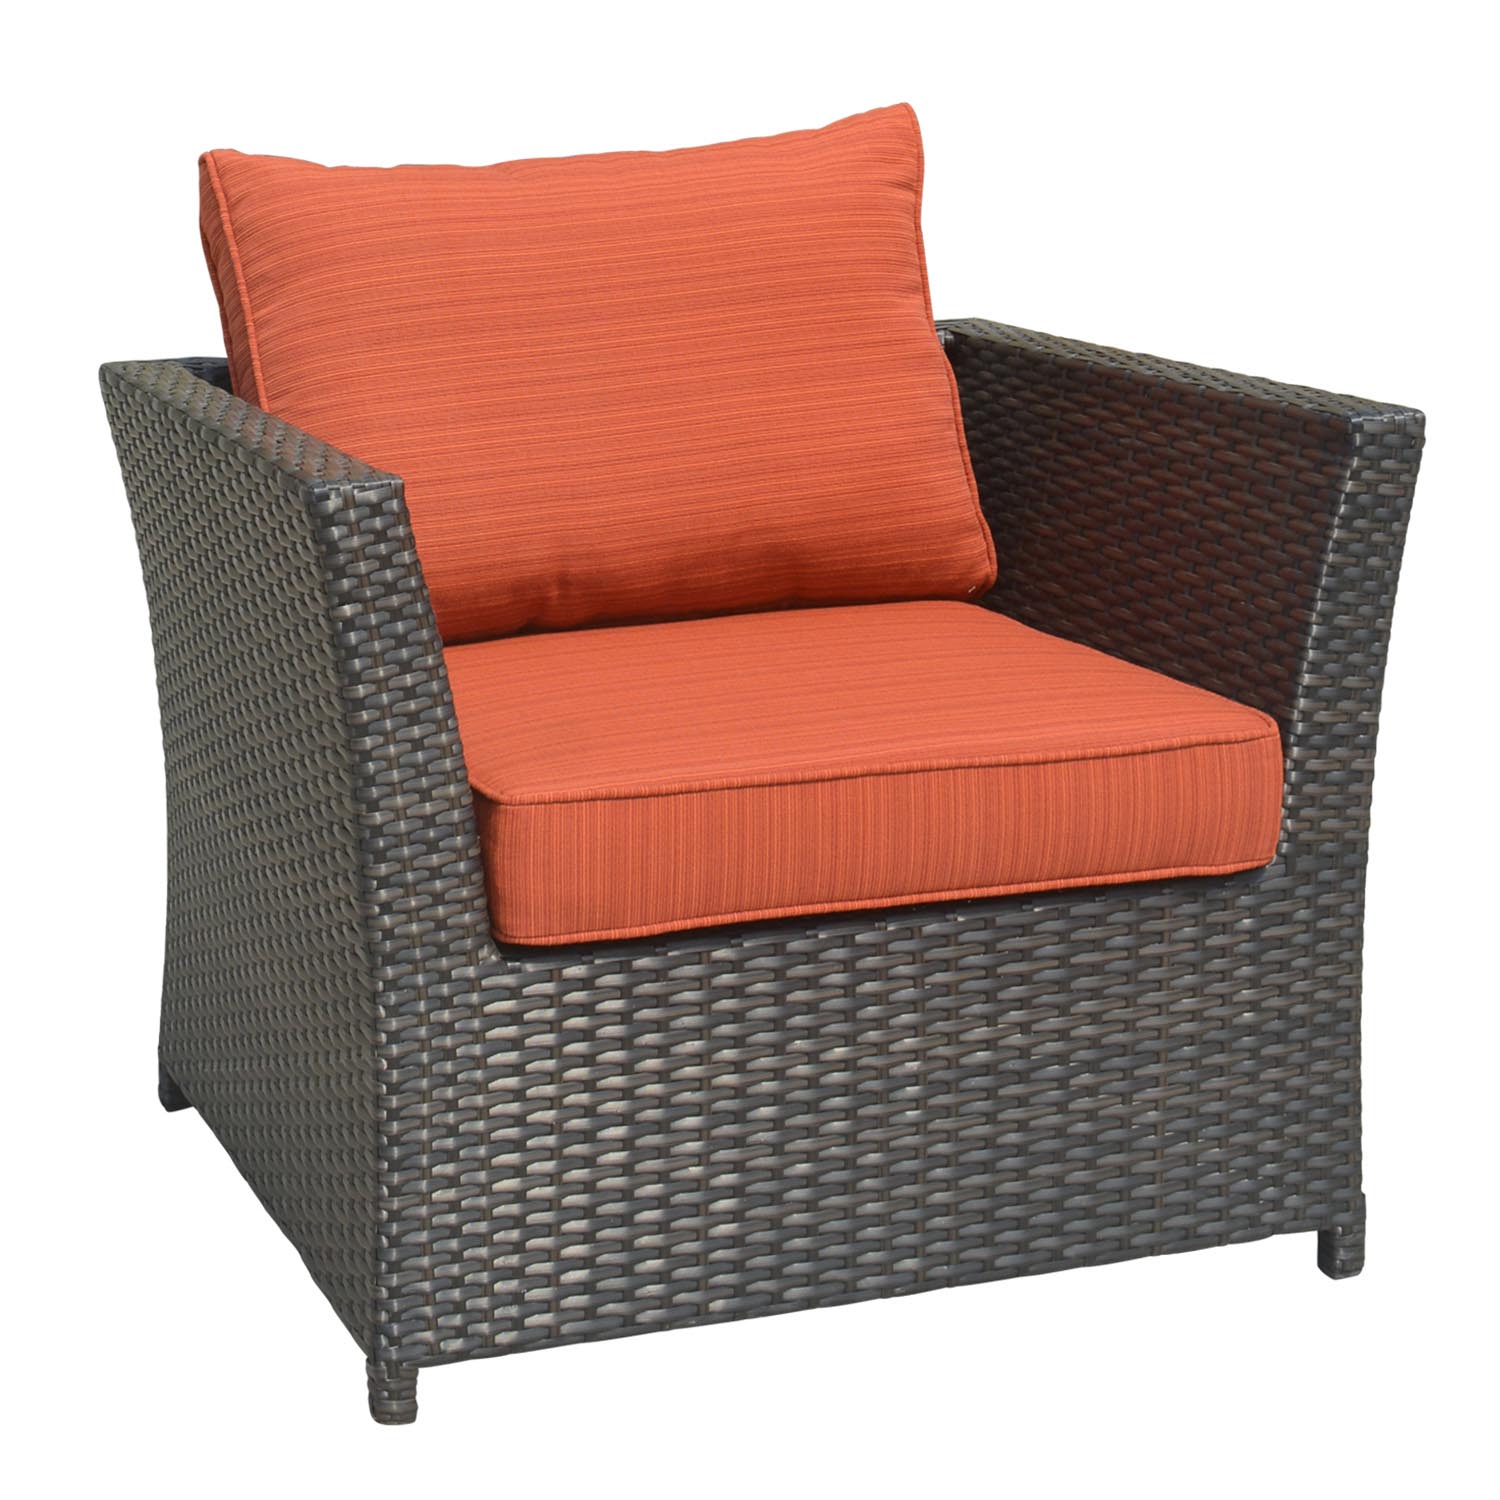 Ovios Outdoor Furniture Rimaru 3-Piece Patio Chair with Ottoman, No Assembly Required